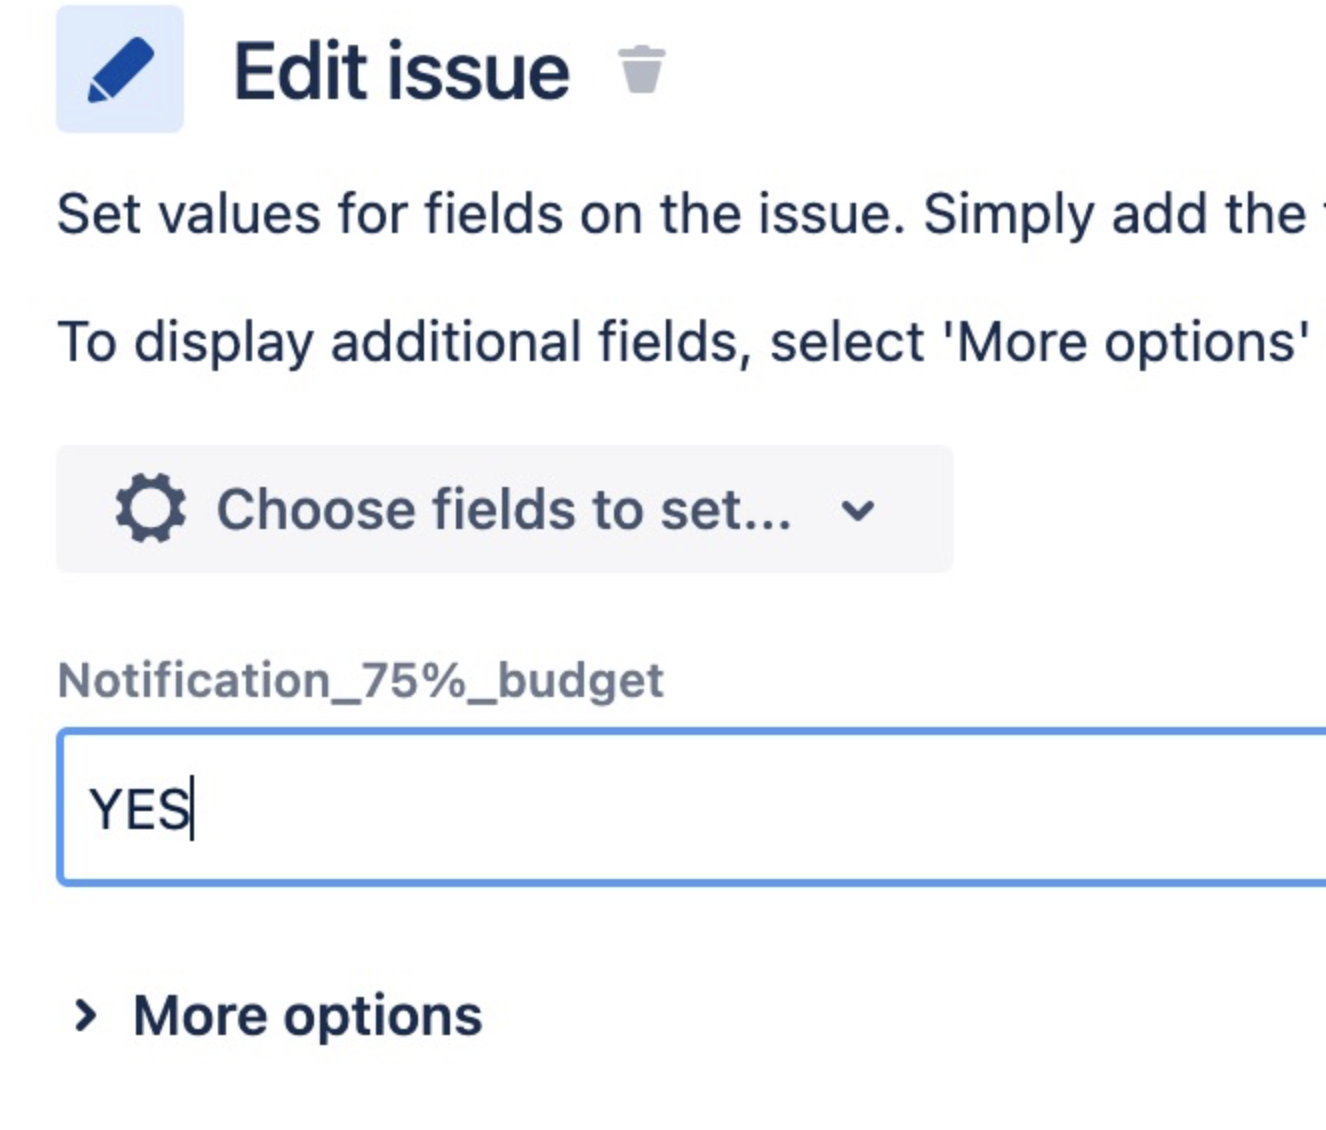 Edit issue automation component to update custom field 